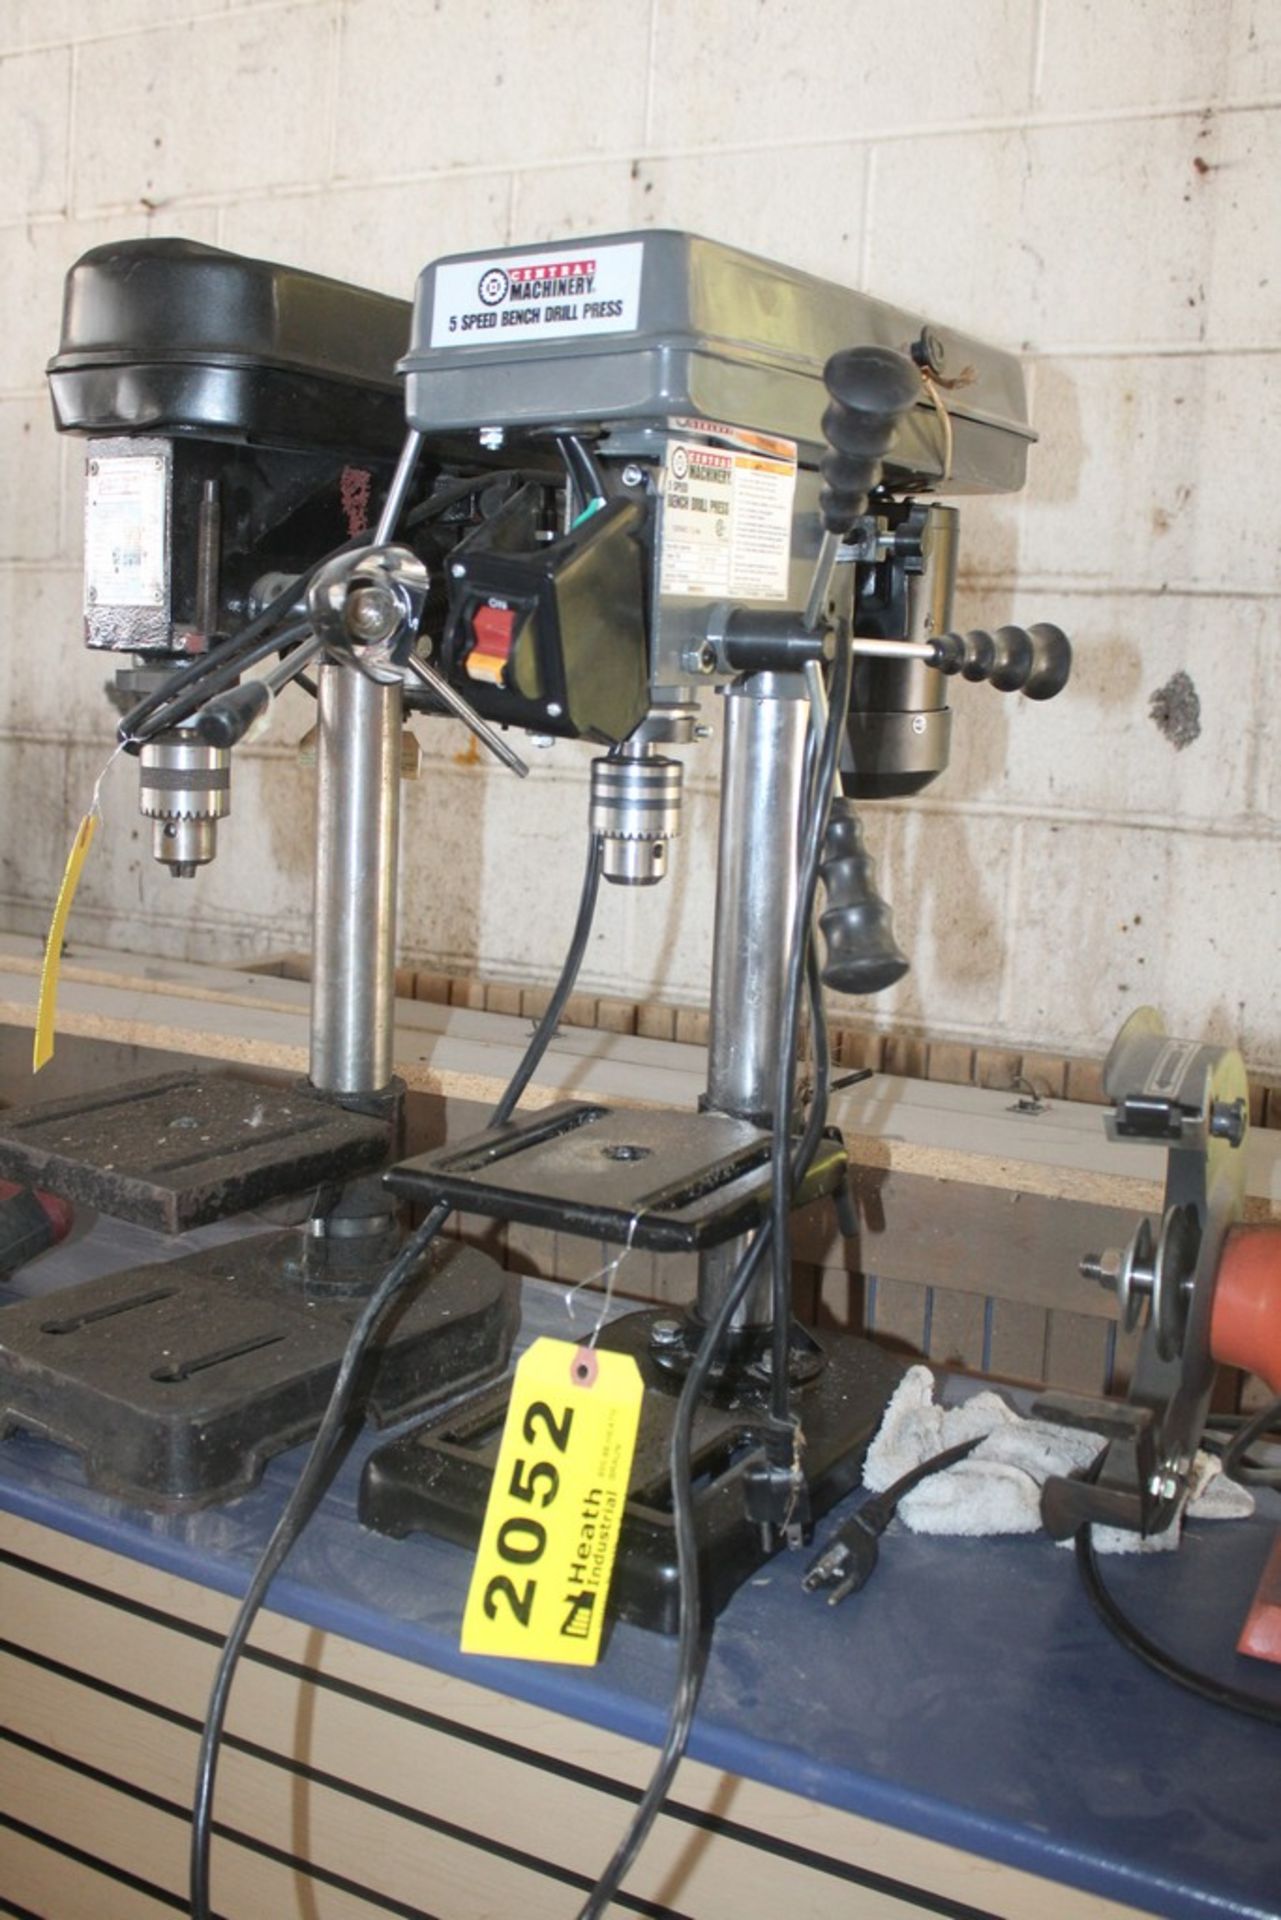 CENTRAL MACHINERY 5-SPEED BENCH-TOP DRILL PRESS